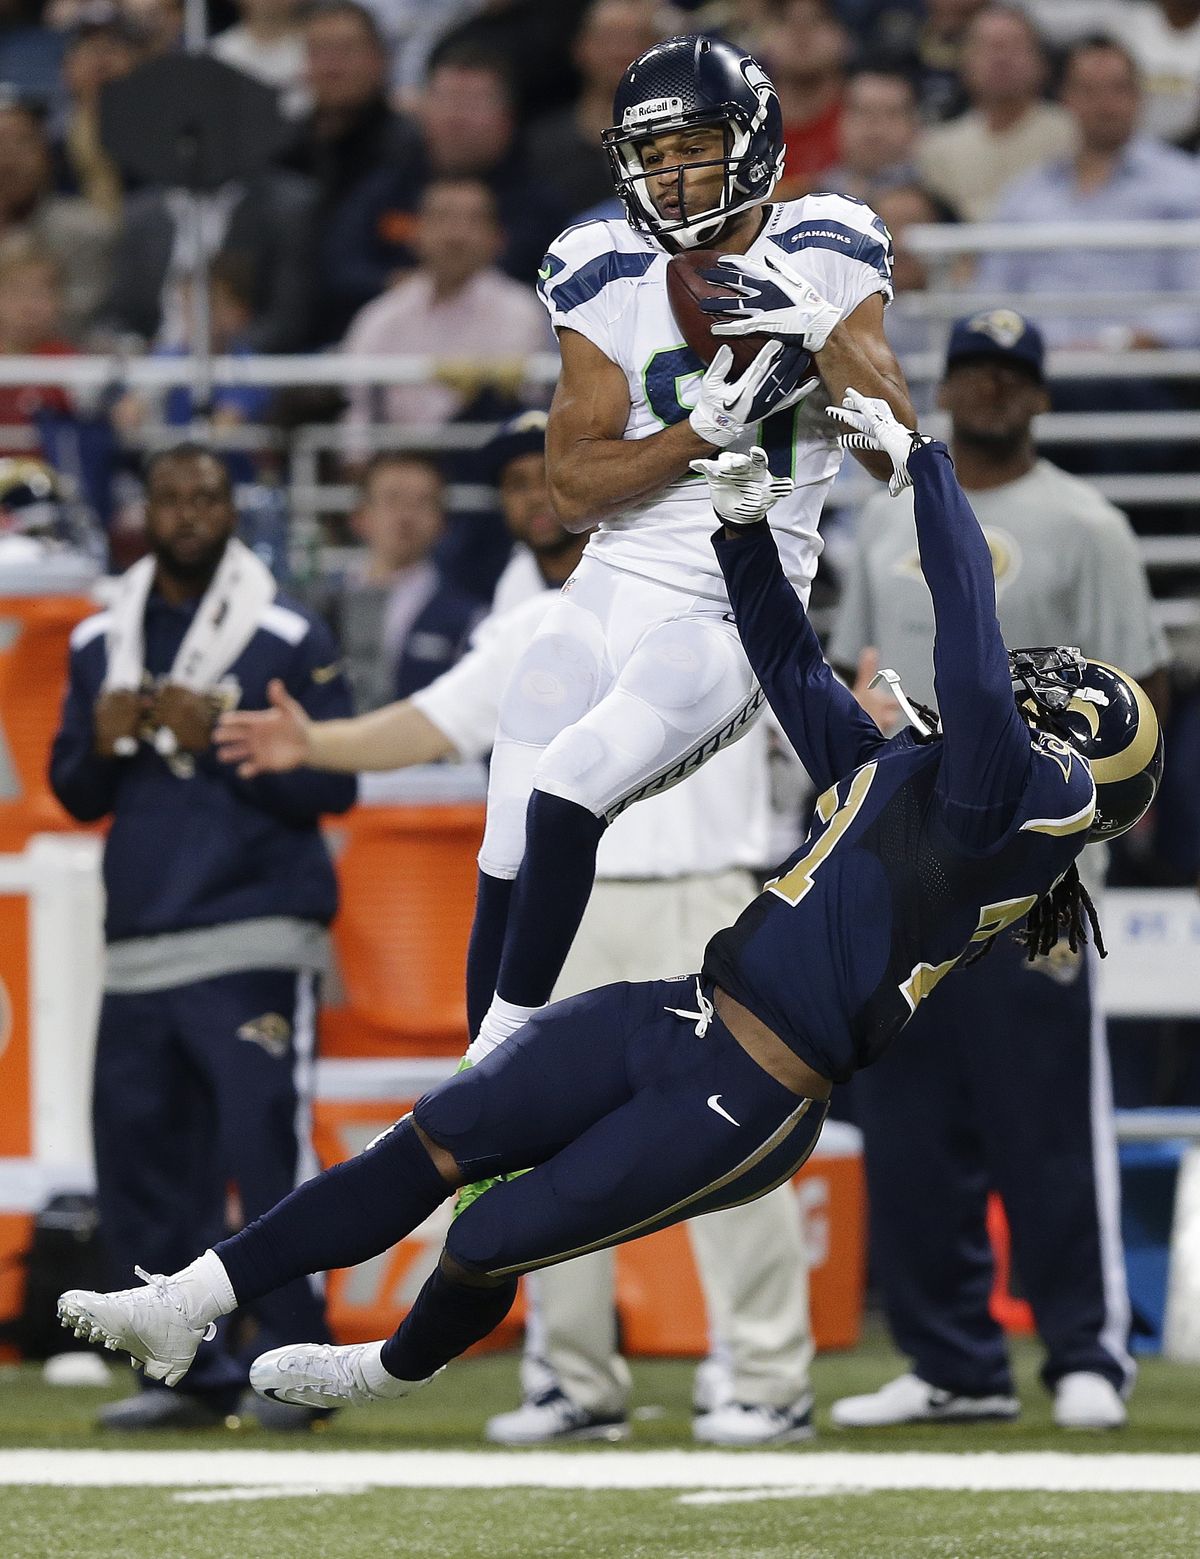 Seahawks wide receiver Golden Tate found the end zone on an 80-yard pass play against St. Louis Rams cornerback Janoris Jenkins. (Associated Press)